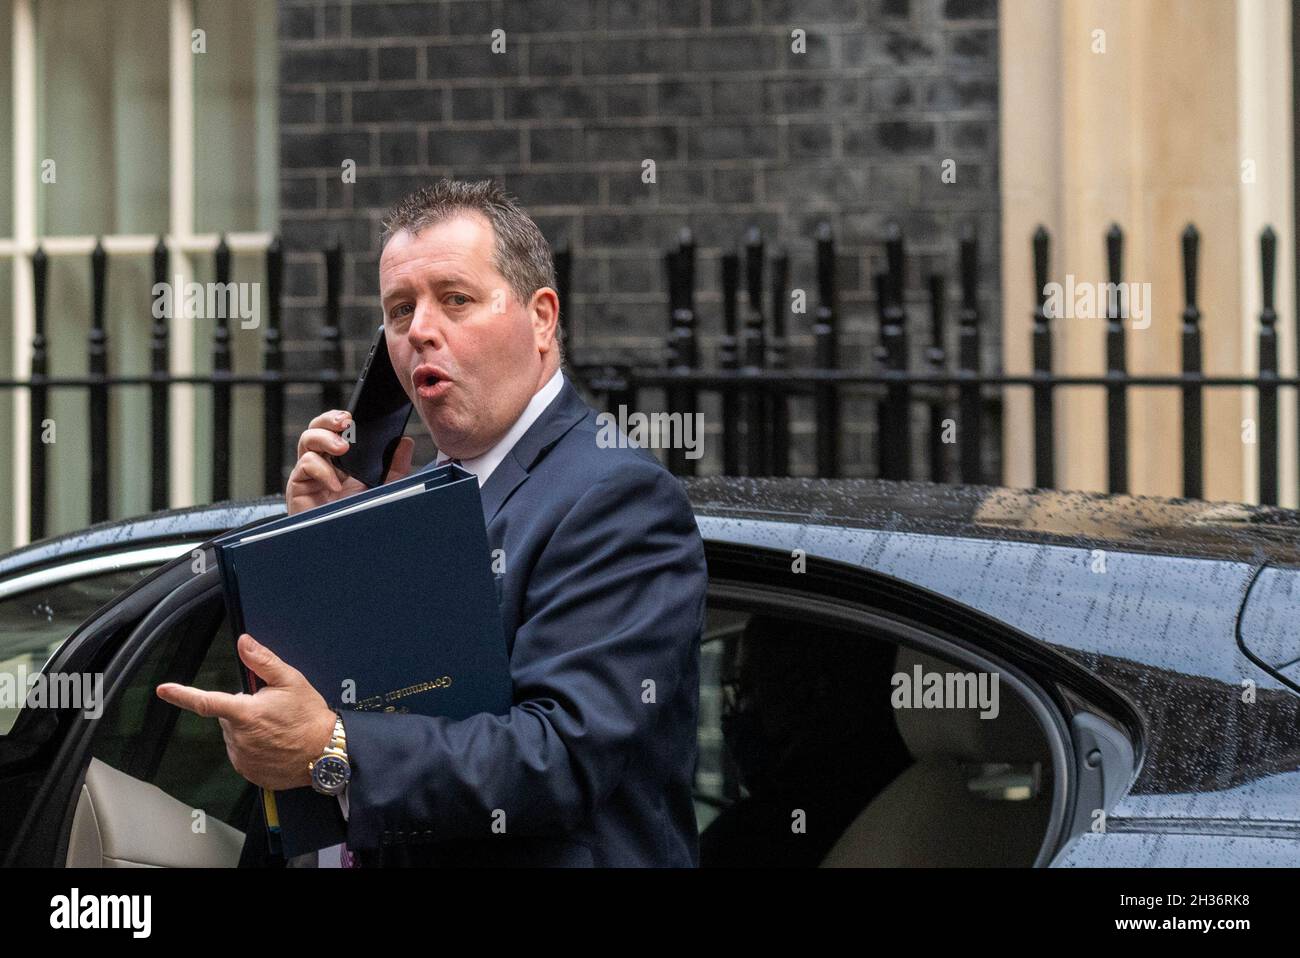 London, UK. 26th Oct, 2021. Cabinet Ministers in Downing Street, Mark Spenser, Chief Whip Credit: Ian Davidson/Alamy Live News Stock Photo